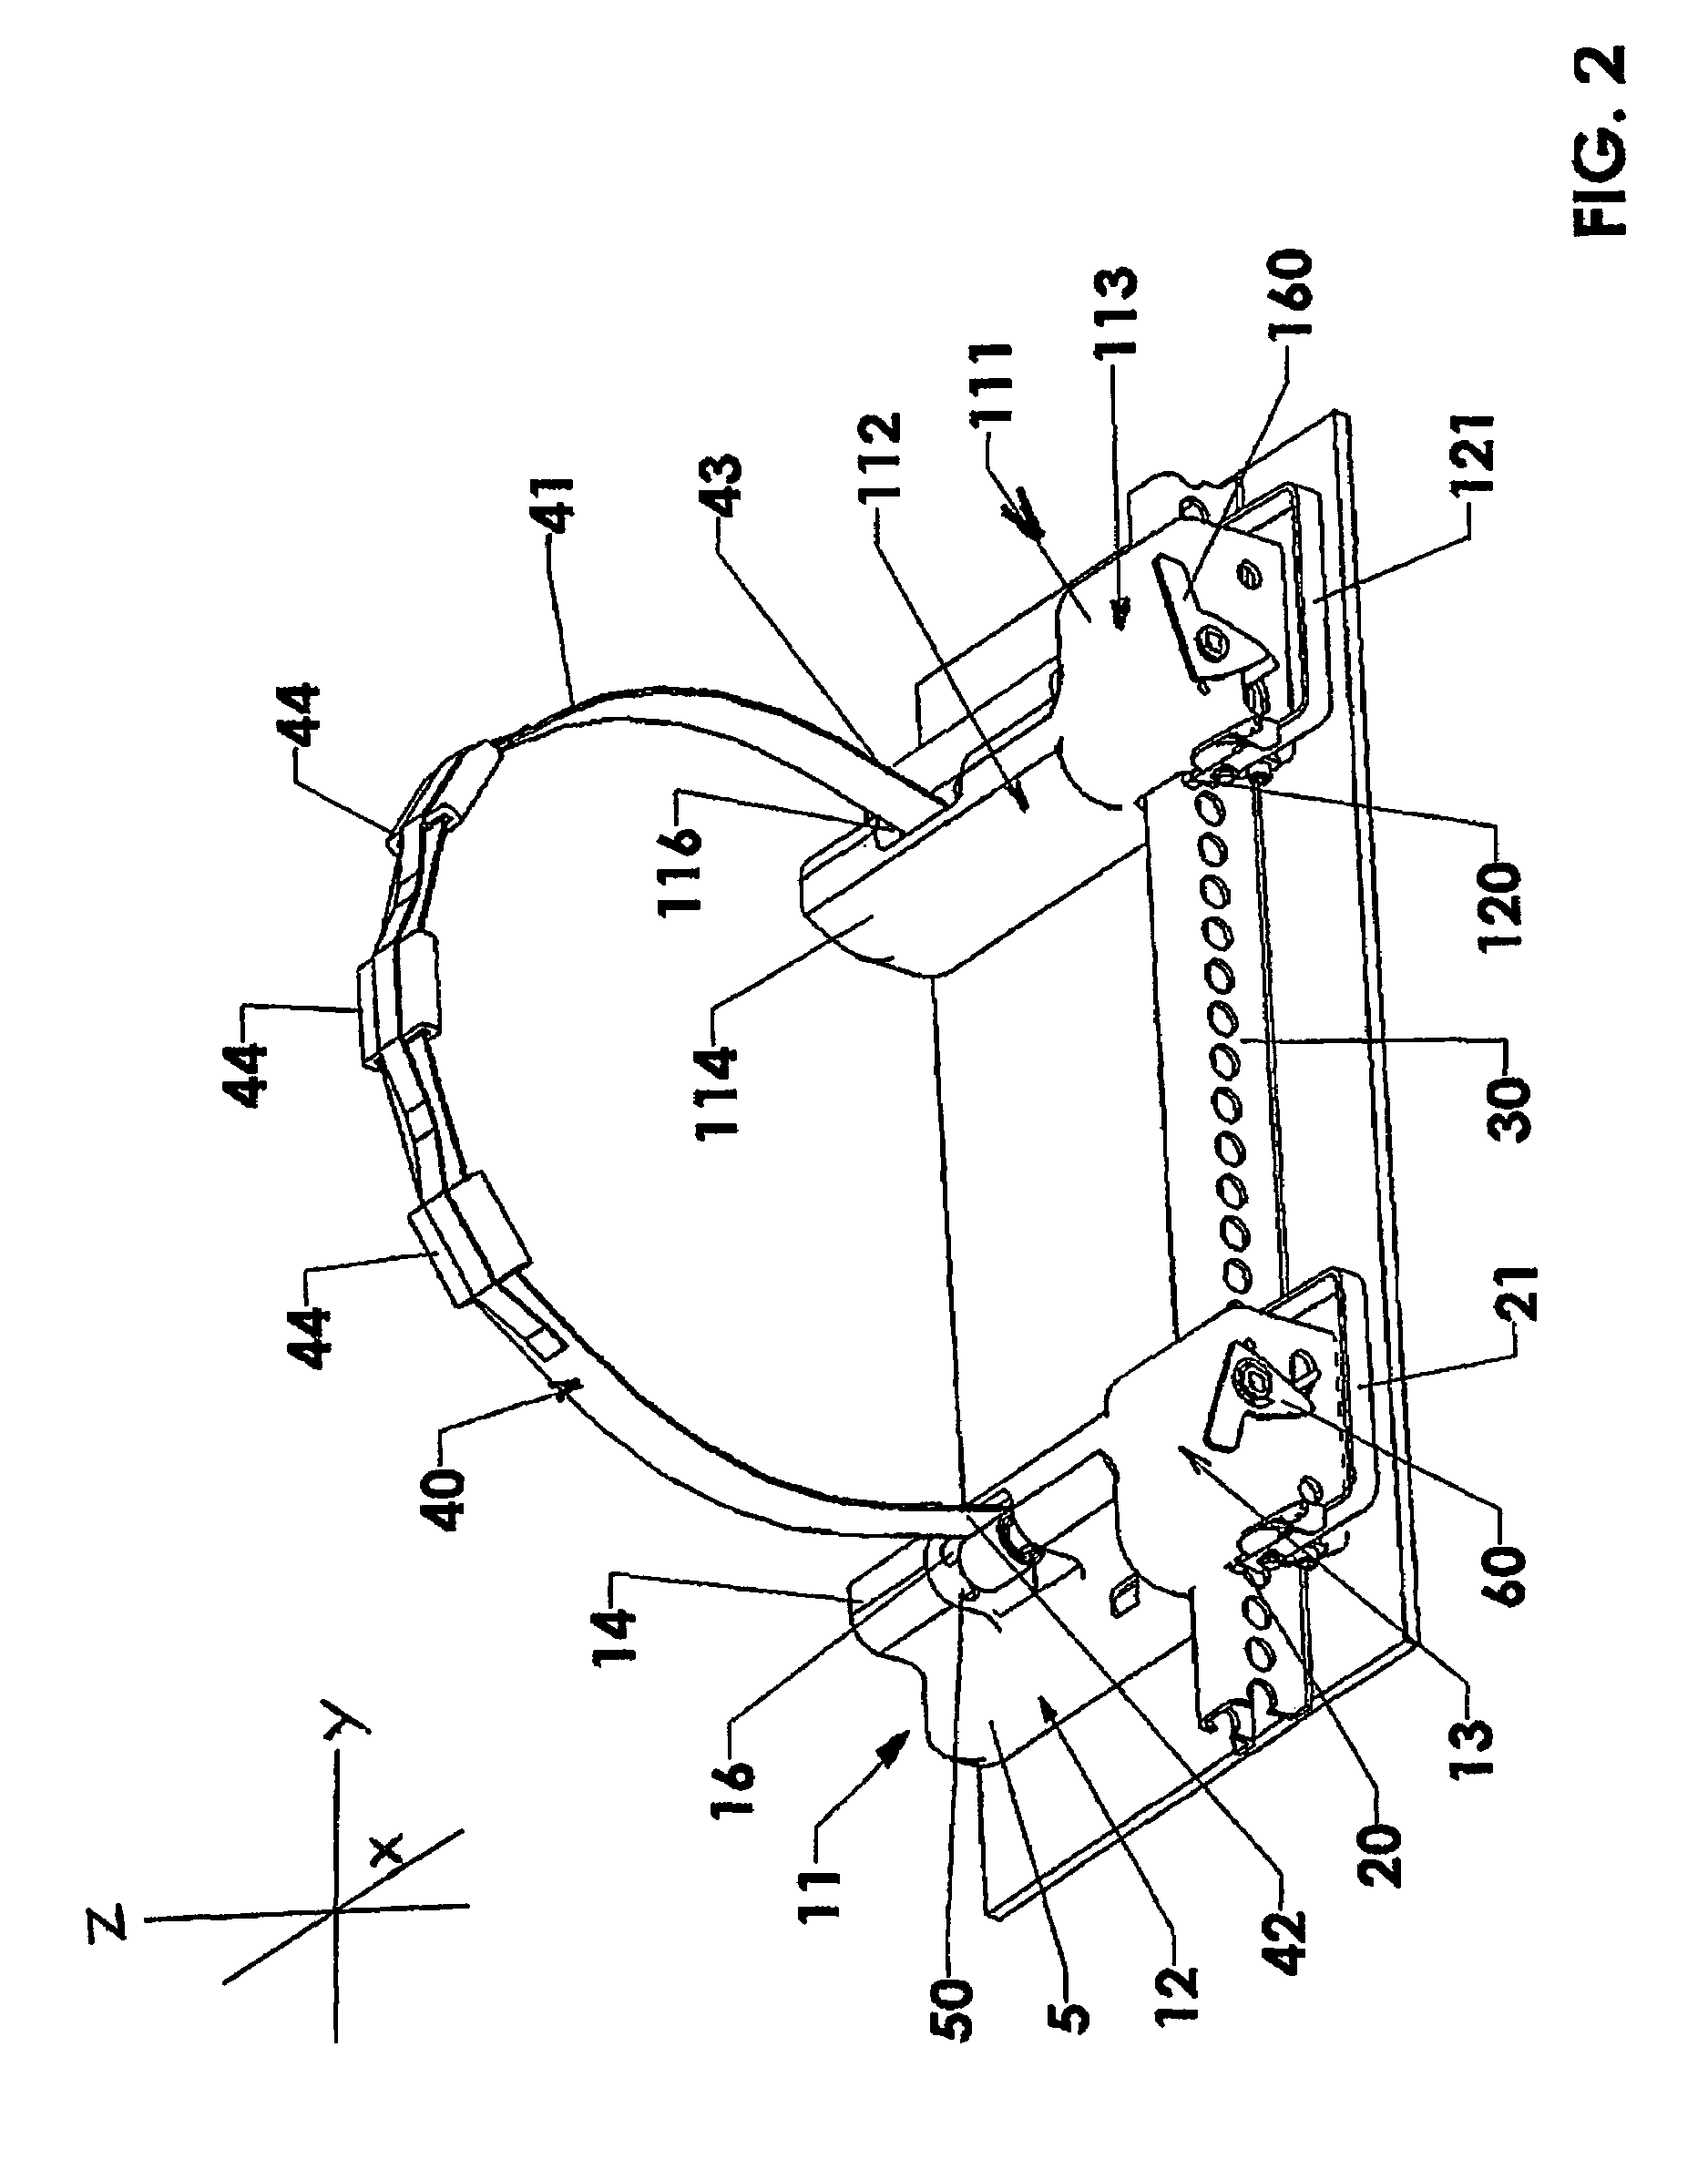 Low-profile wheel chock assembly